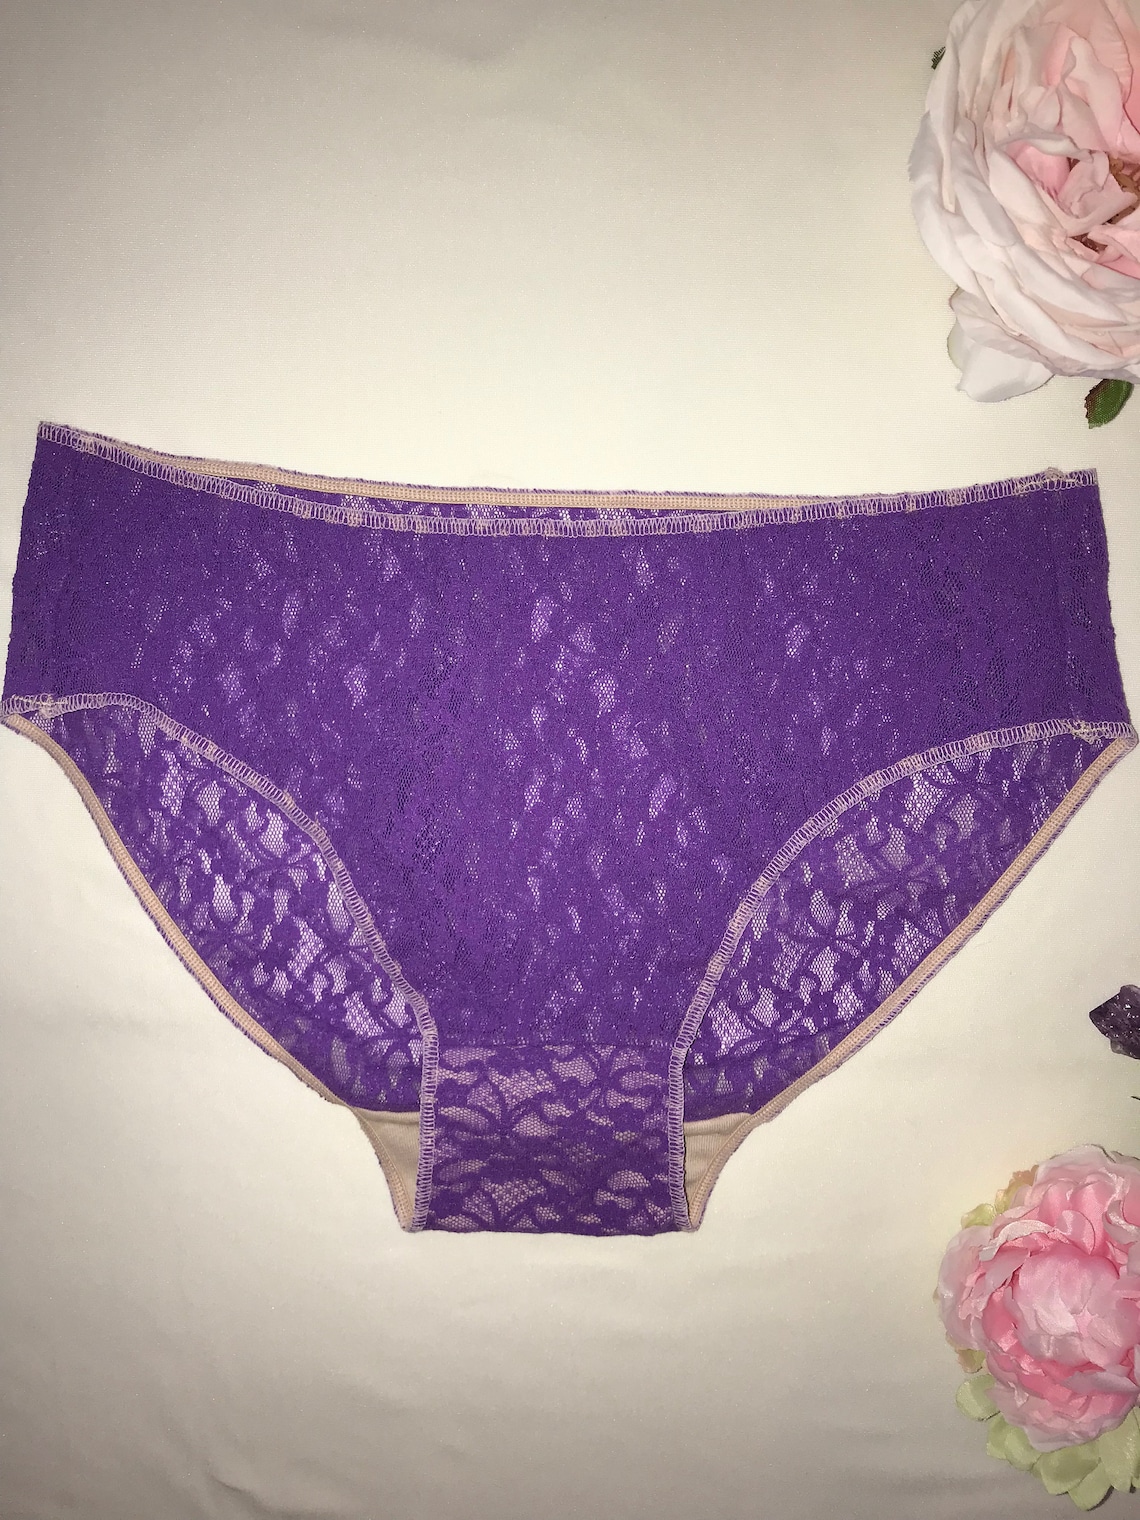 See Through Lace Panties Stretch Lace Panties Violet Panties - Etsy Canada